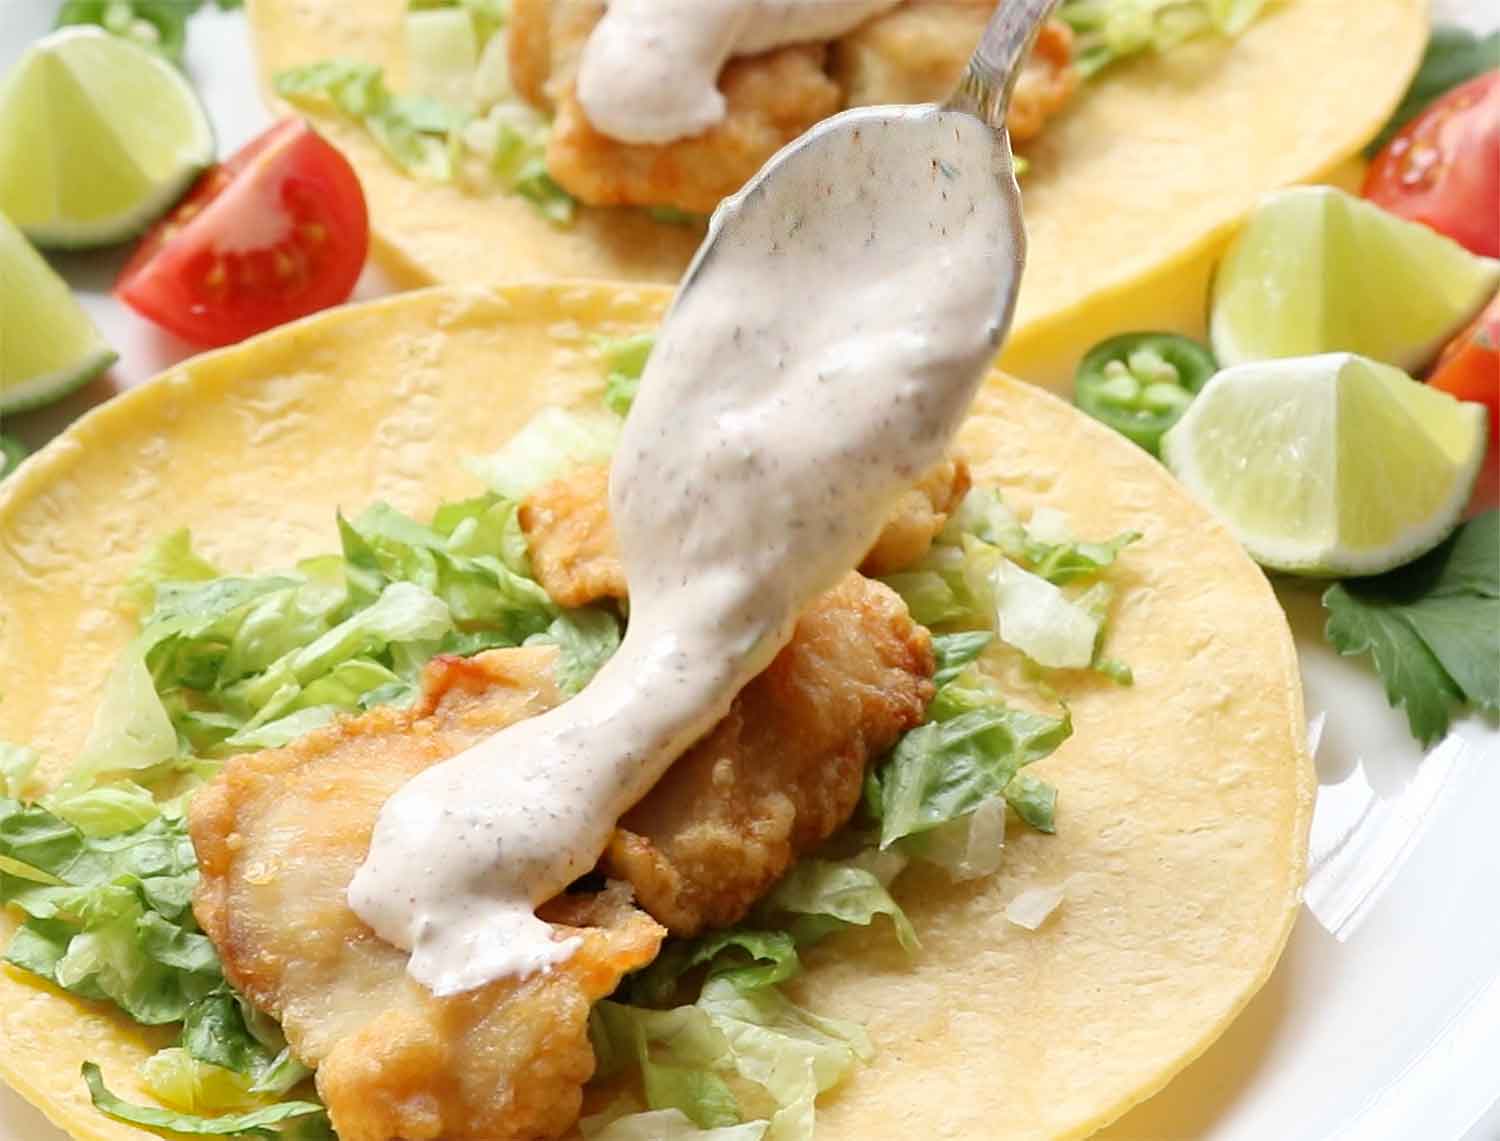 Spooning the fish taco sauce over a fish taco.